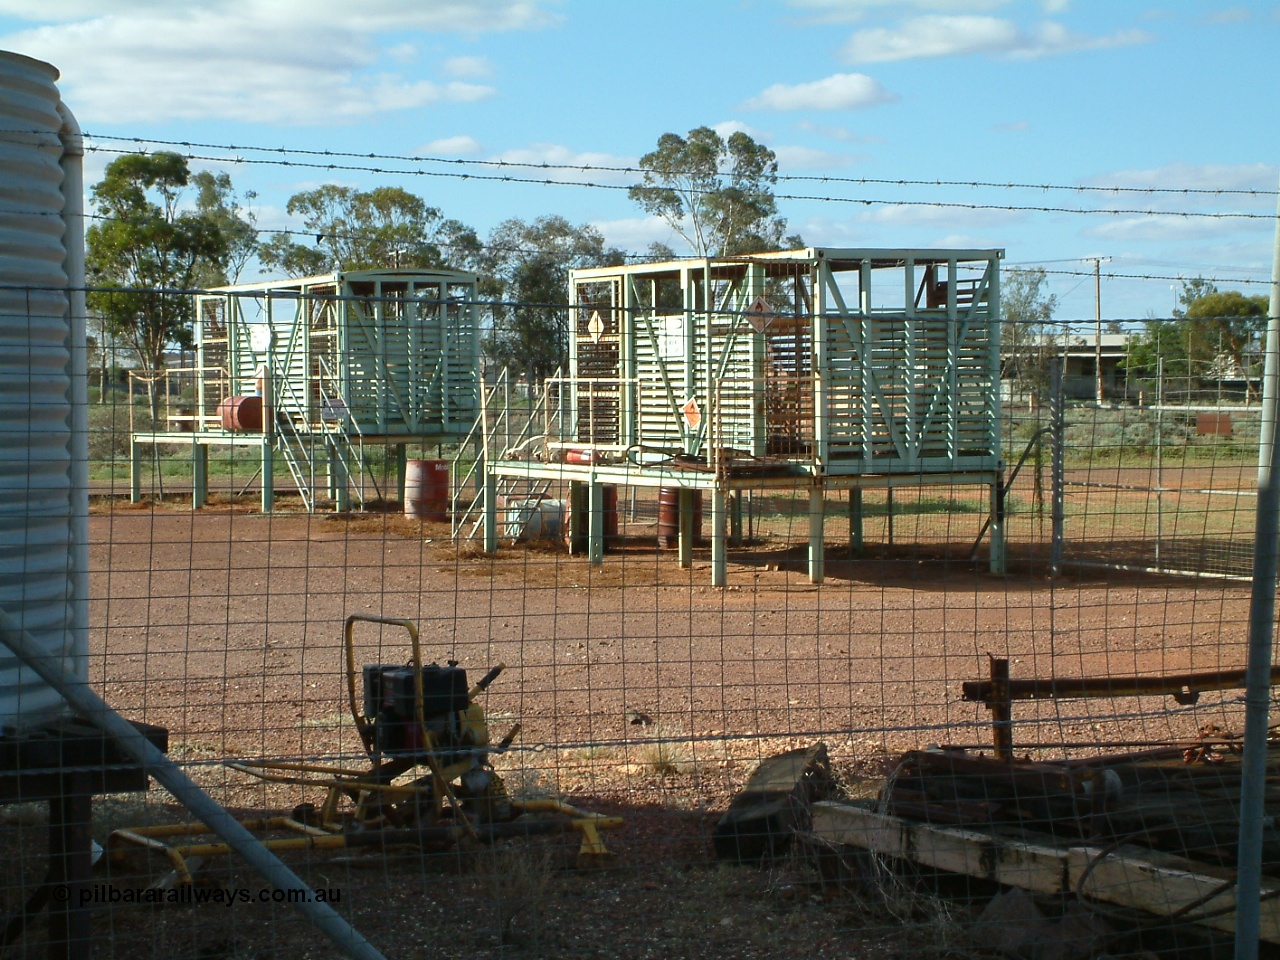 030415 155956
Tarcoola, at the 504.5 km, works compound see old livestock waggons converted to storage shed for gas bottles and the like. [url=https://goo.gl/maps/6oGe5dhUe3chHeB57]GeoData location[/url]. 15th April 2003.
